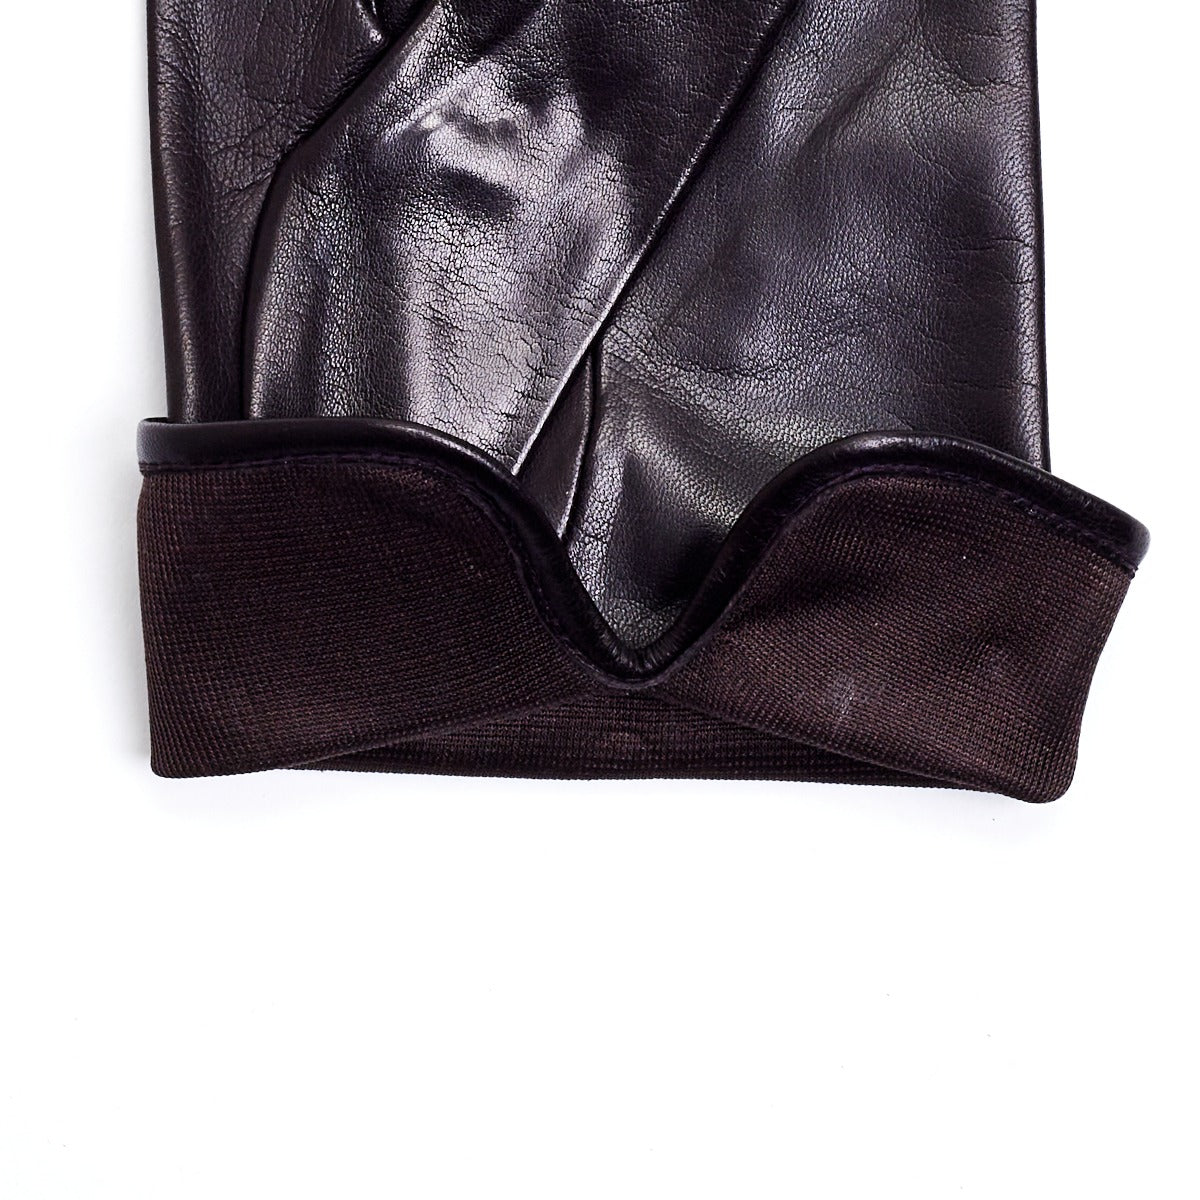 A pair of Sovereign Grade Dark Brown Nappa Leather Gloves, Silk Lined from KirbyAllison.com on a white surface.